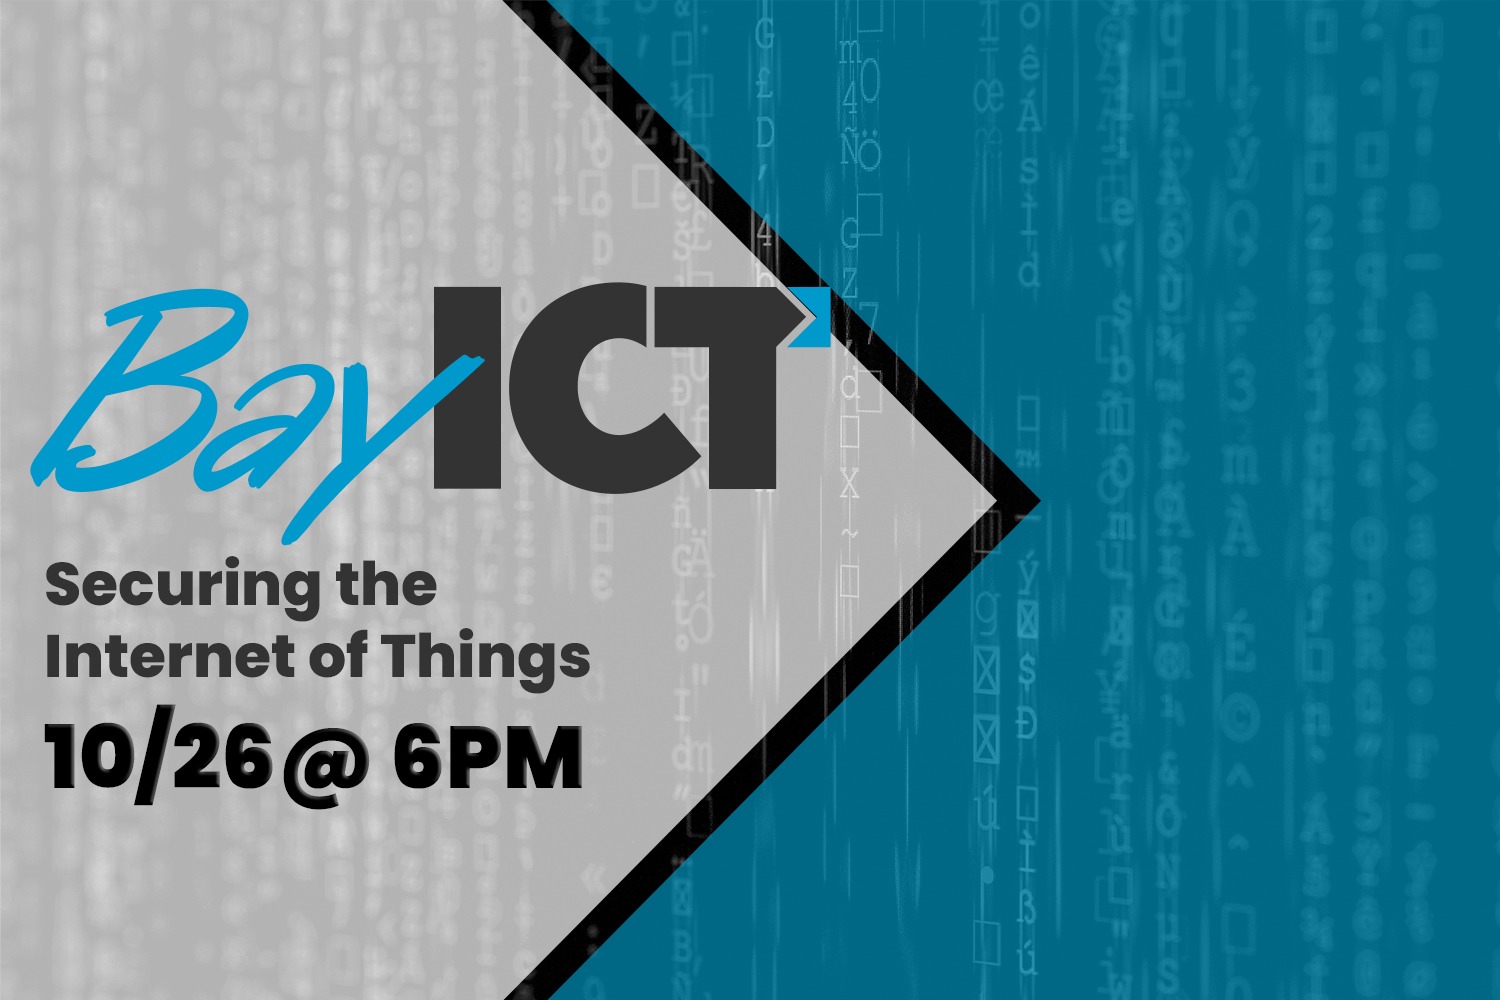 October Tech Talk (10/26) Securing the Internet of Things